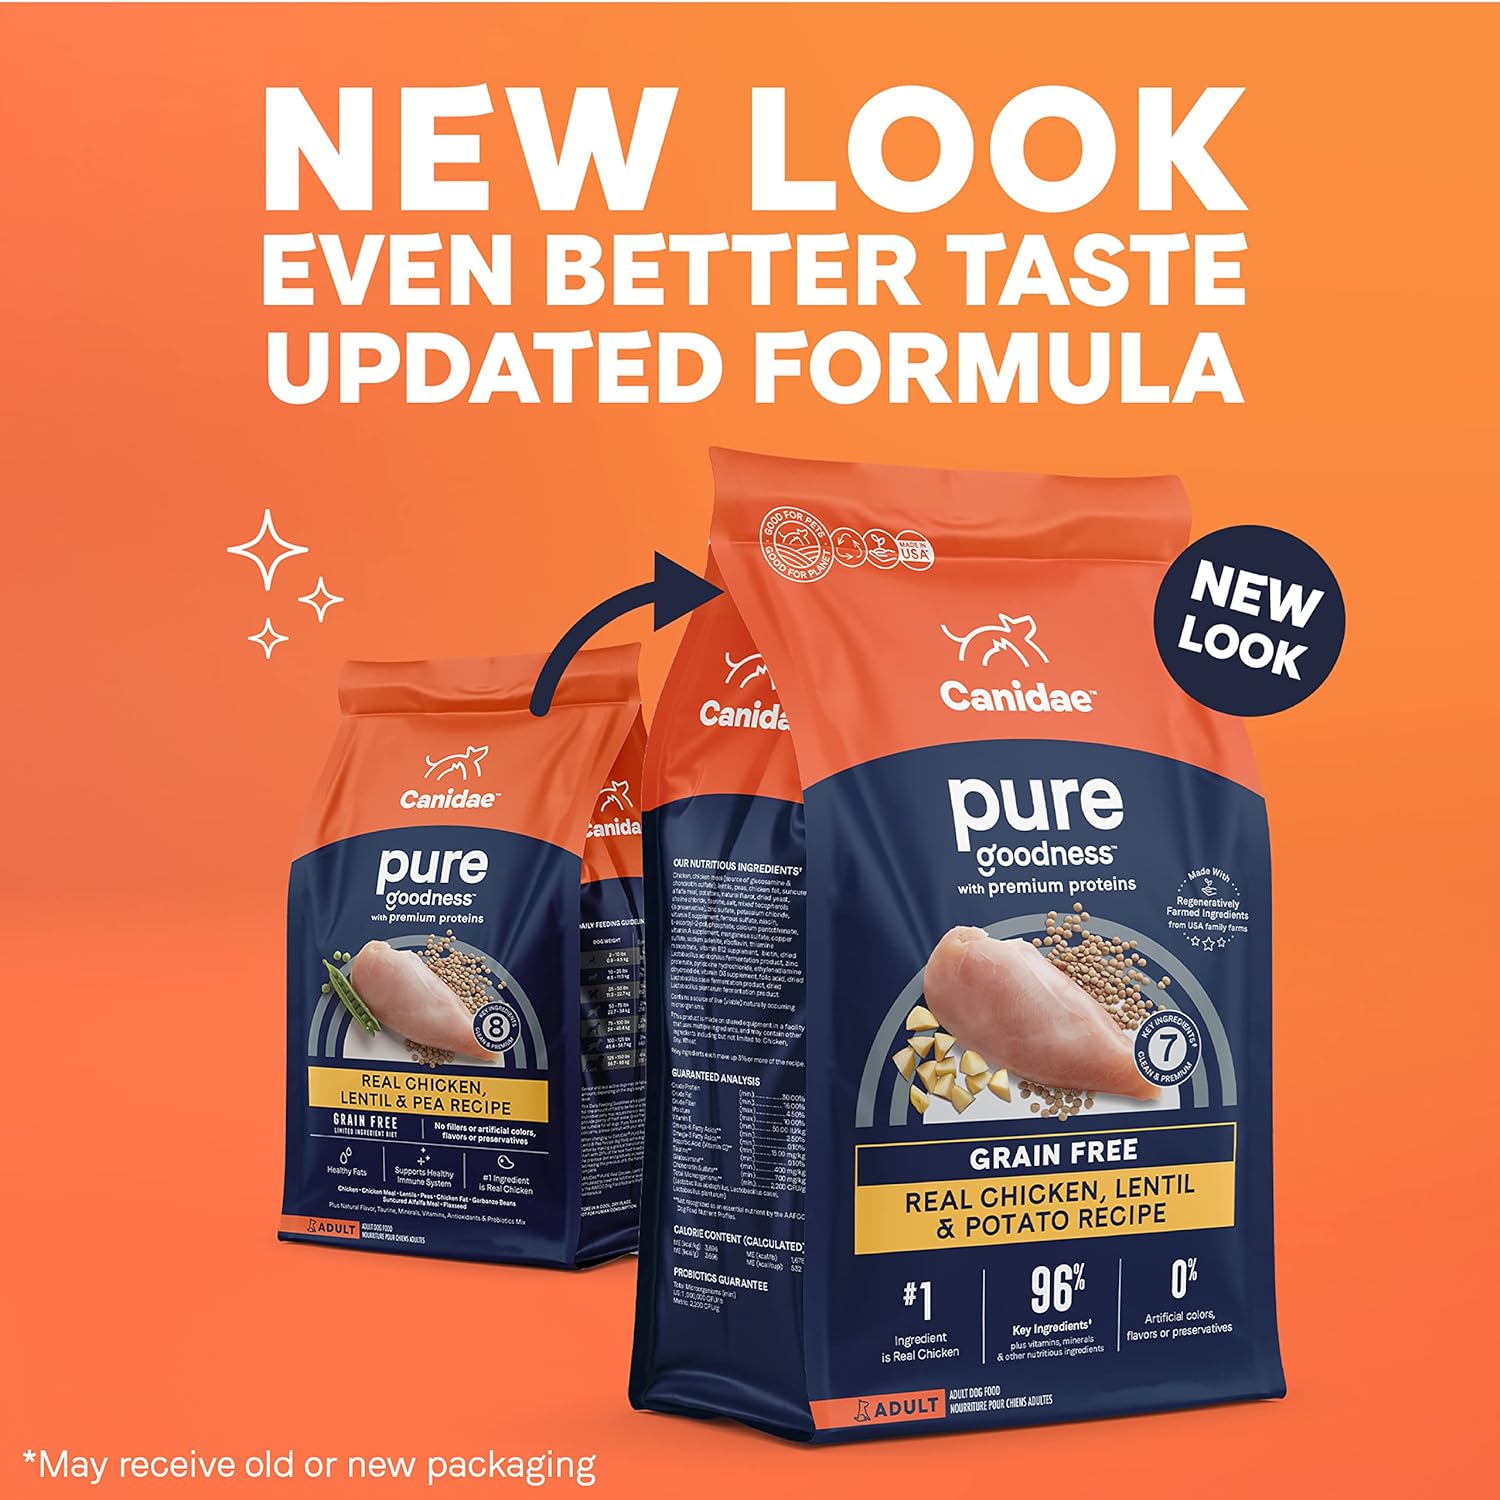 Canidae Pure Grain-Free Real Chicken, Lentil & Pea Recipe Dry Dog Food – Gallery Image 2